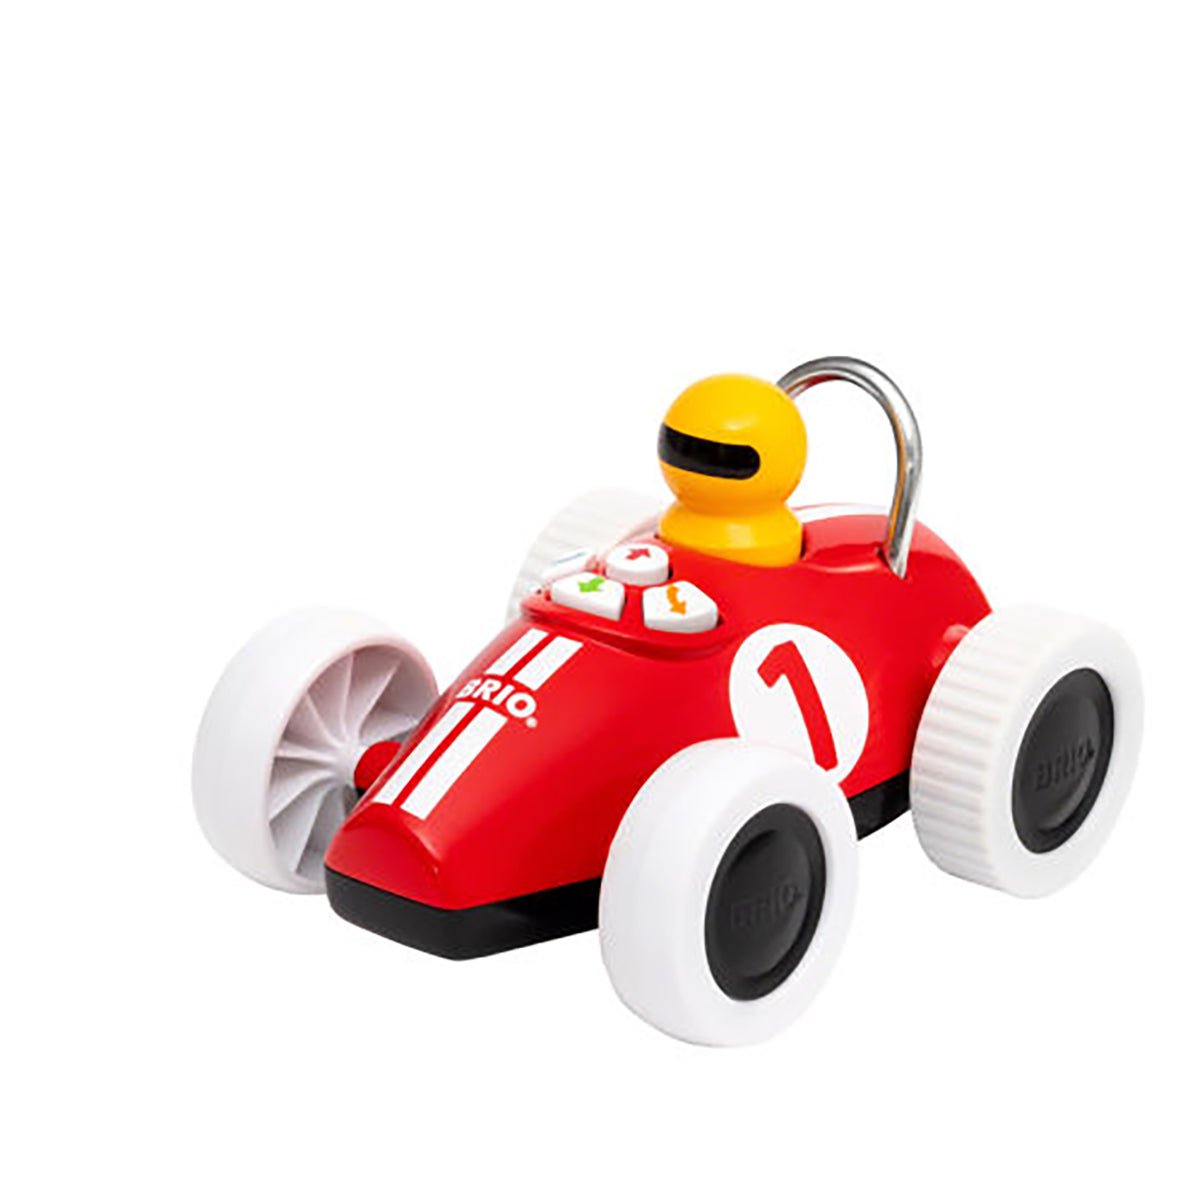 Brio Play and Learn Action Racer | Brio